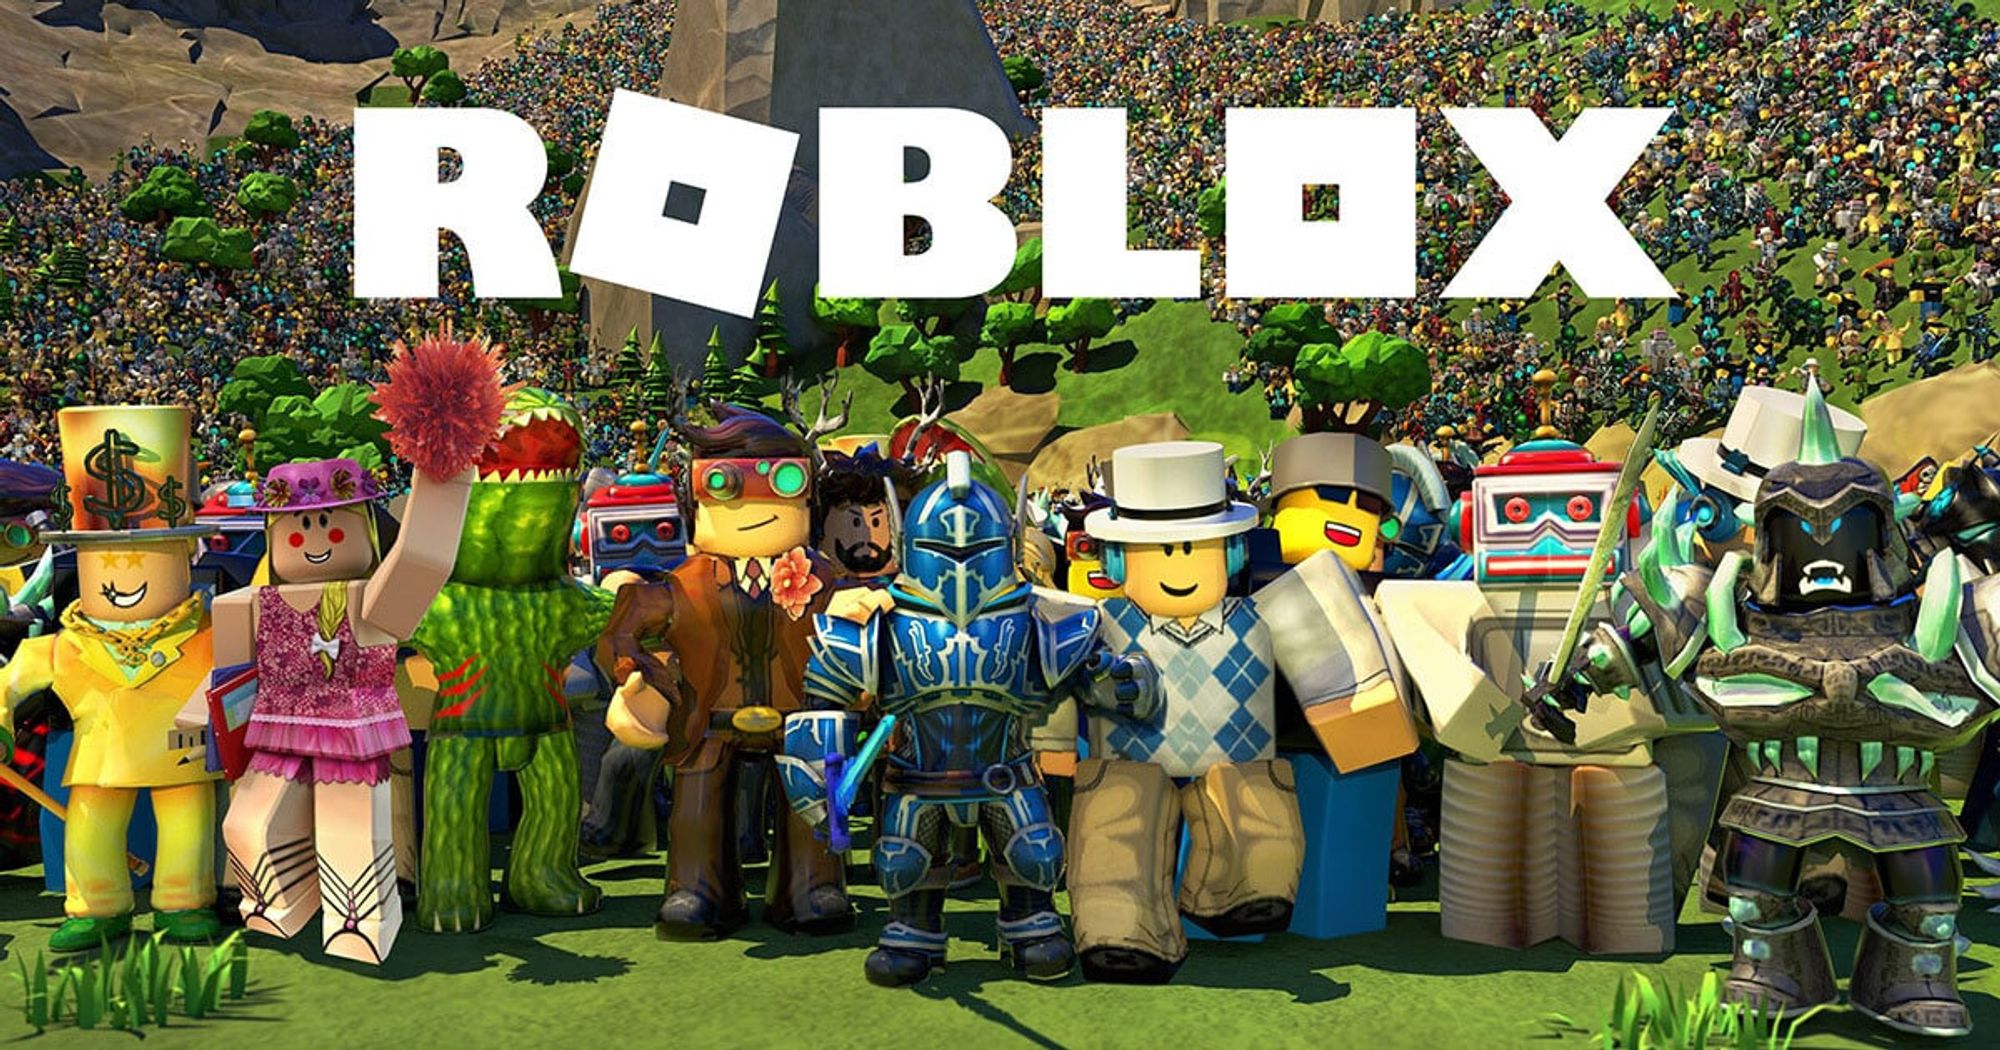 Free Roblox Codes Free Roblox Gift Card Code 2019 No Survey No - free roblox gift card code generator free gift card code generator